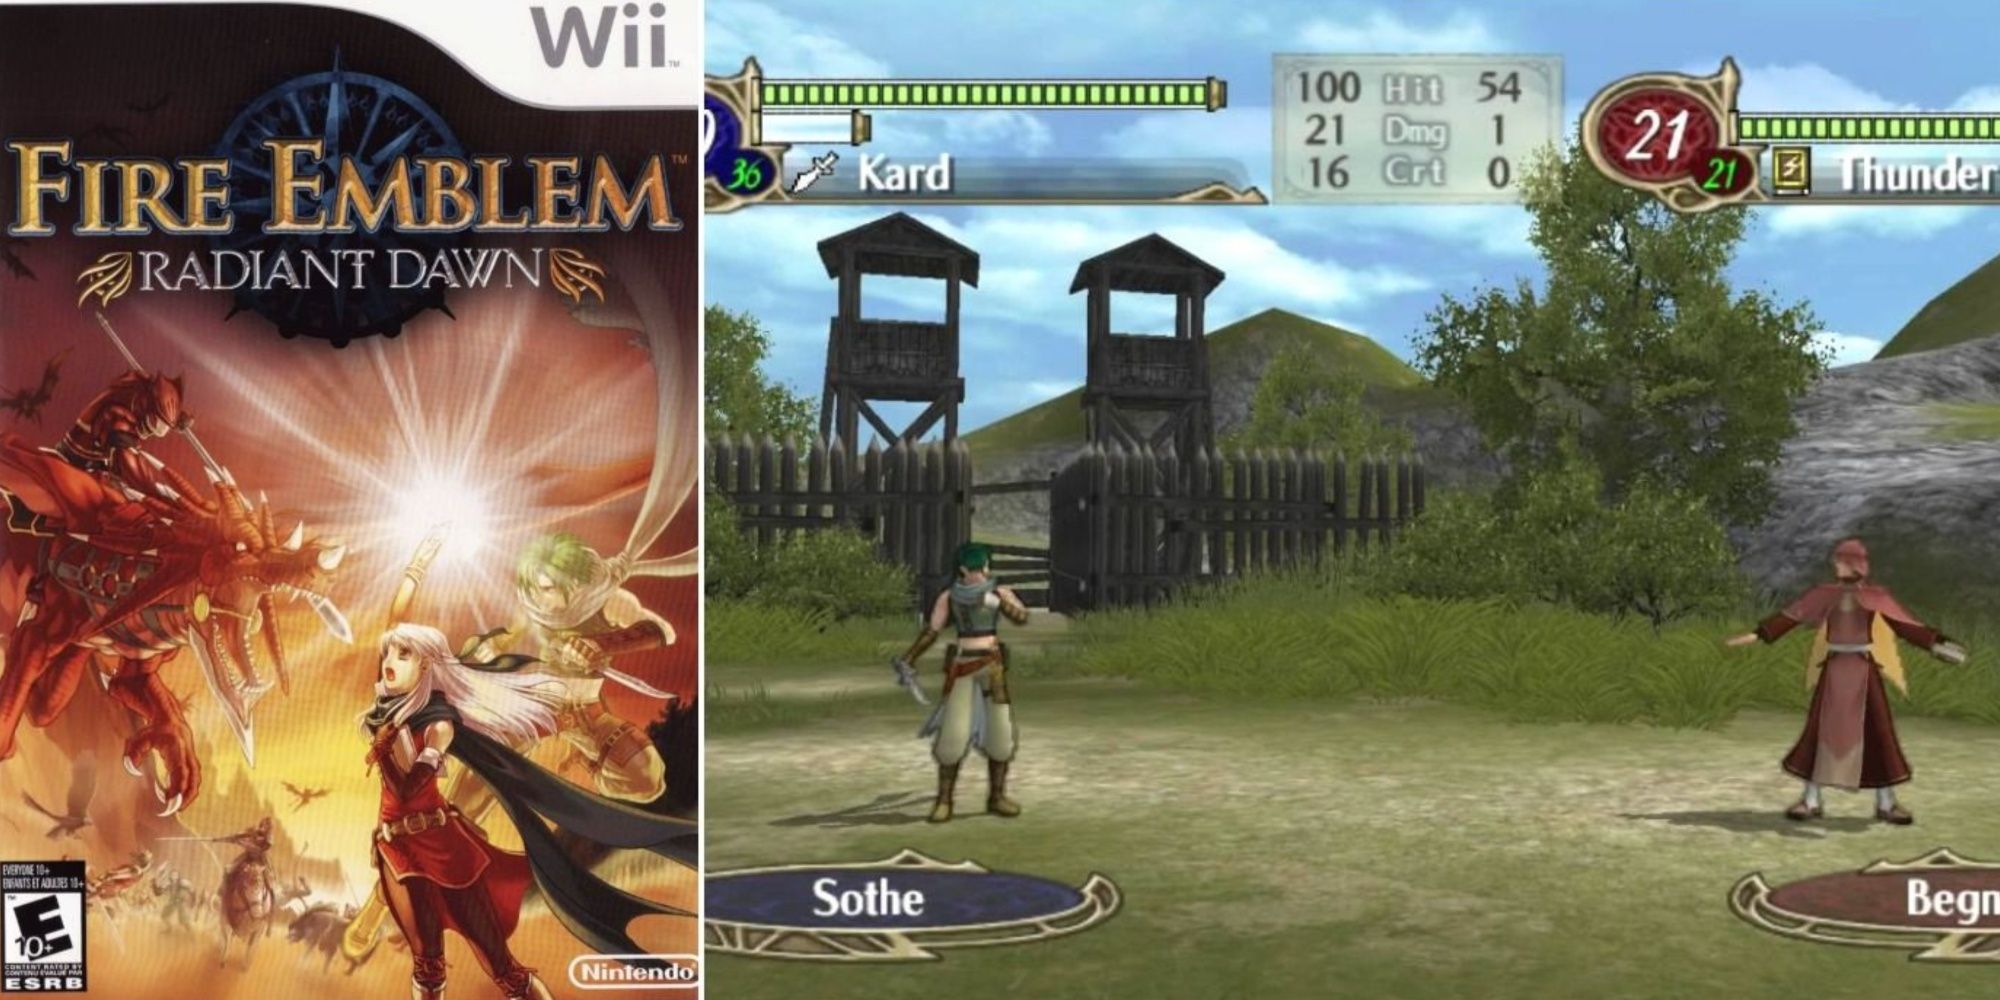 A split-image of the Wii cover artwork for Fire Emblem: Radiant Dawn and gameplay of Sothe facing off with another character.